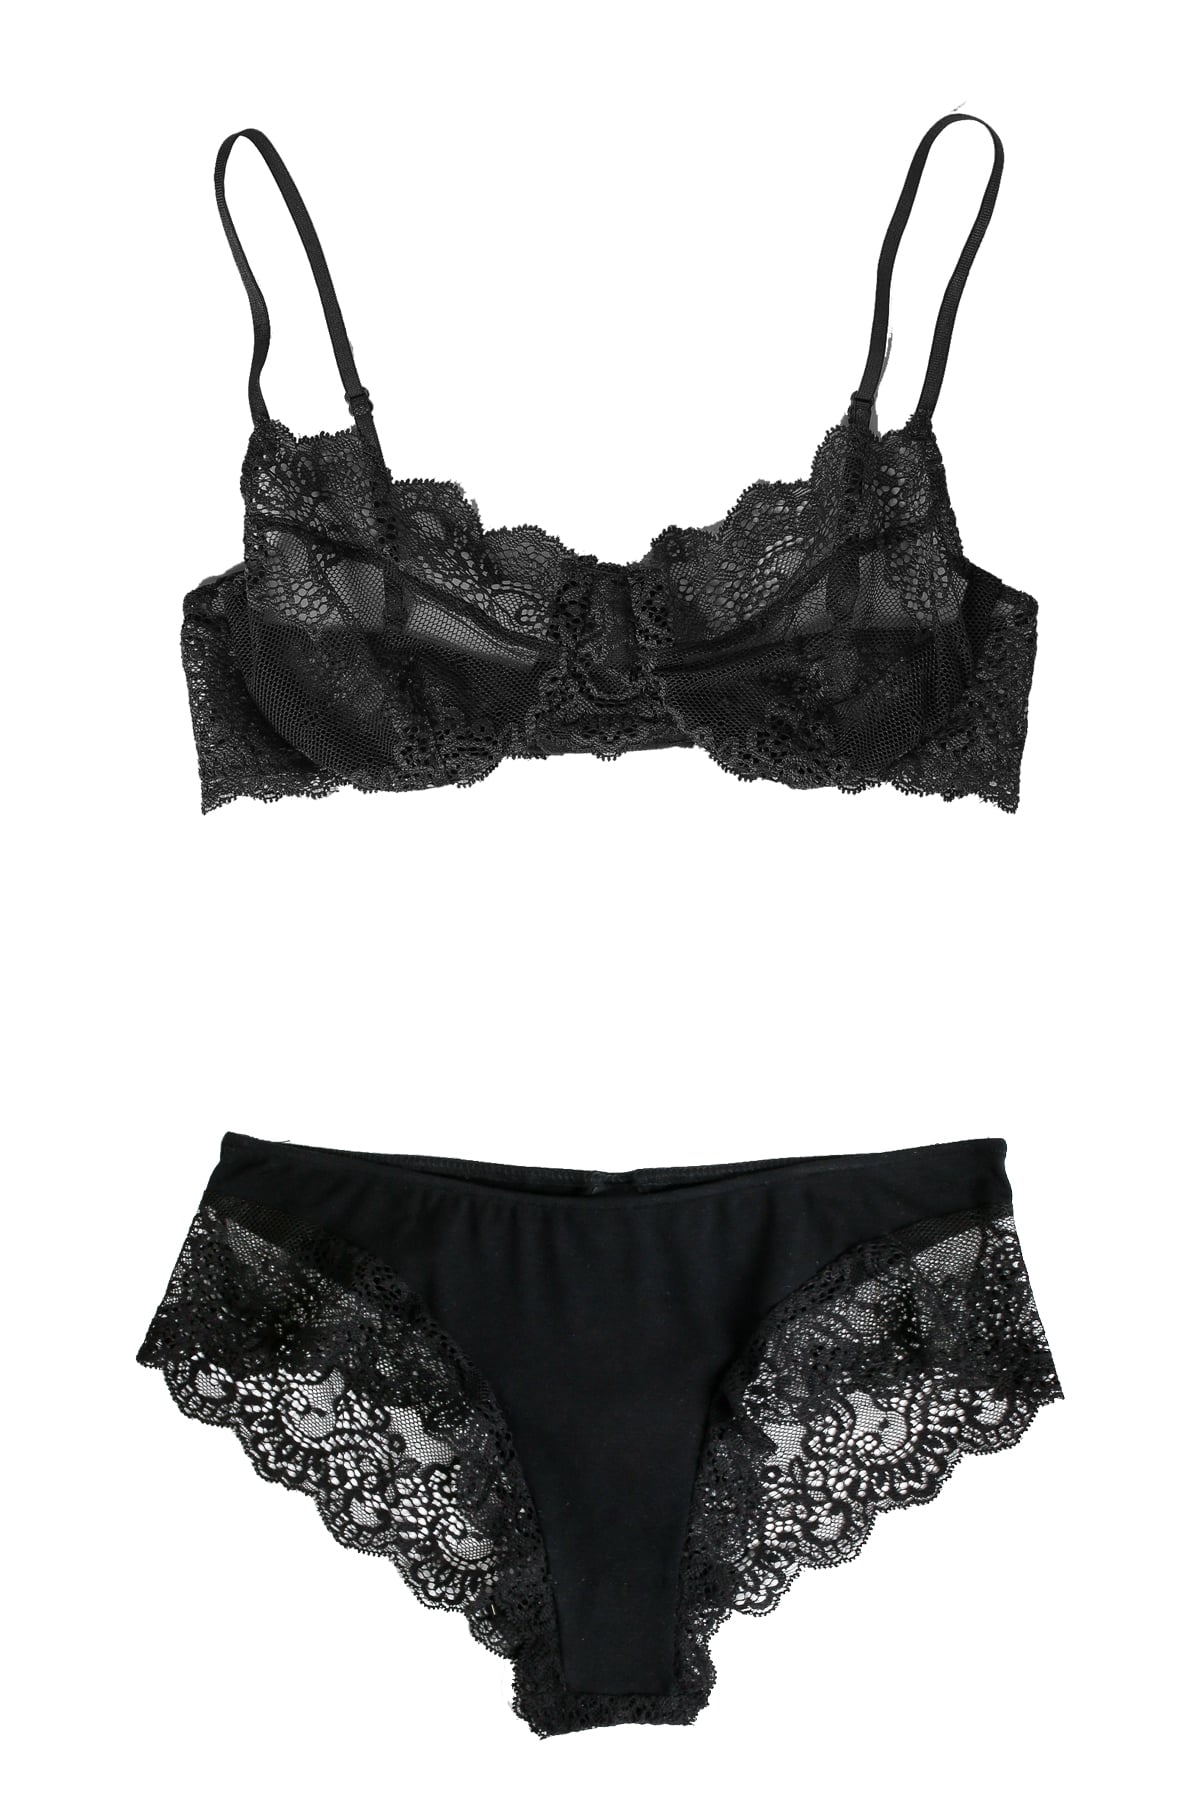 Only Hearts,So Fine Sheer Lace Bralette by Only Hearts at Free